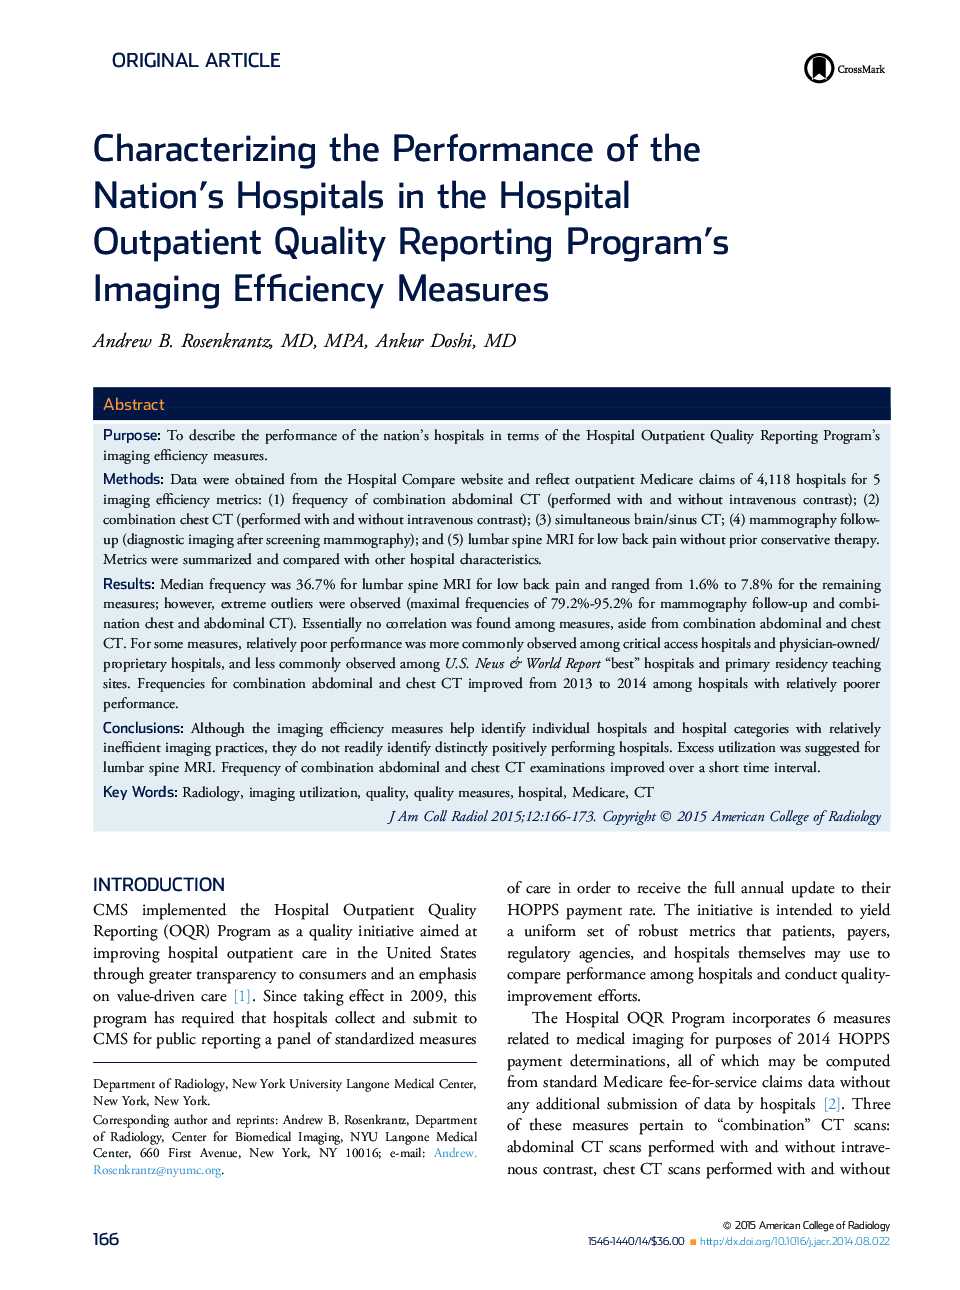 Characterizing the Performance of the Nation's Hospitals in the Hospital Outpatient Quality Reporting Program's Imaging Efficiency Measures